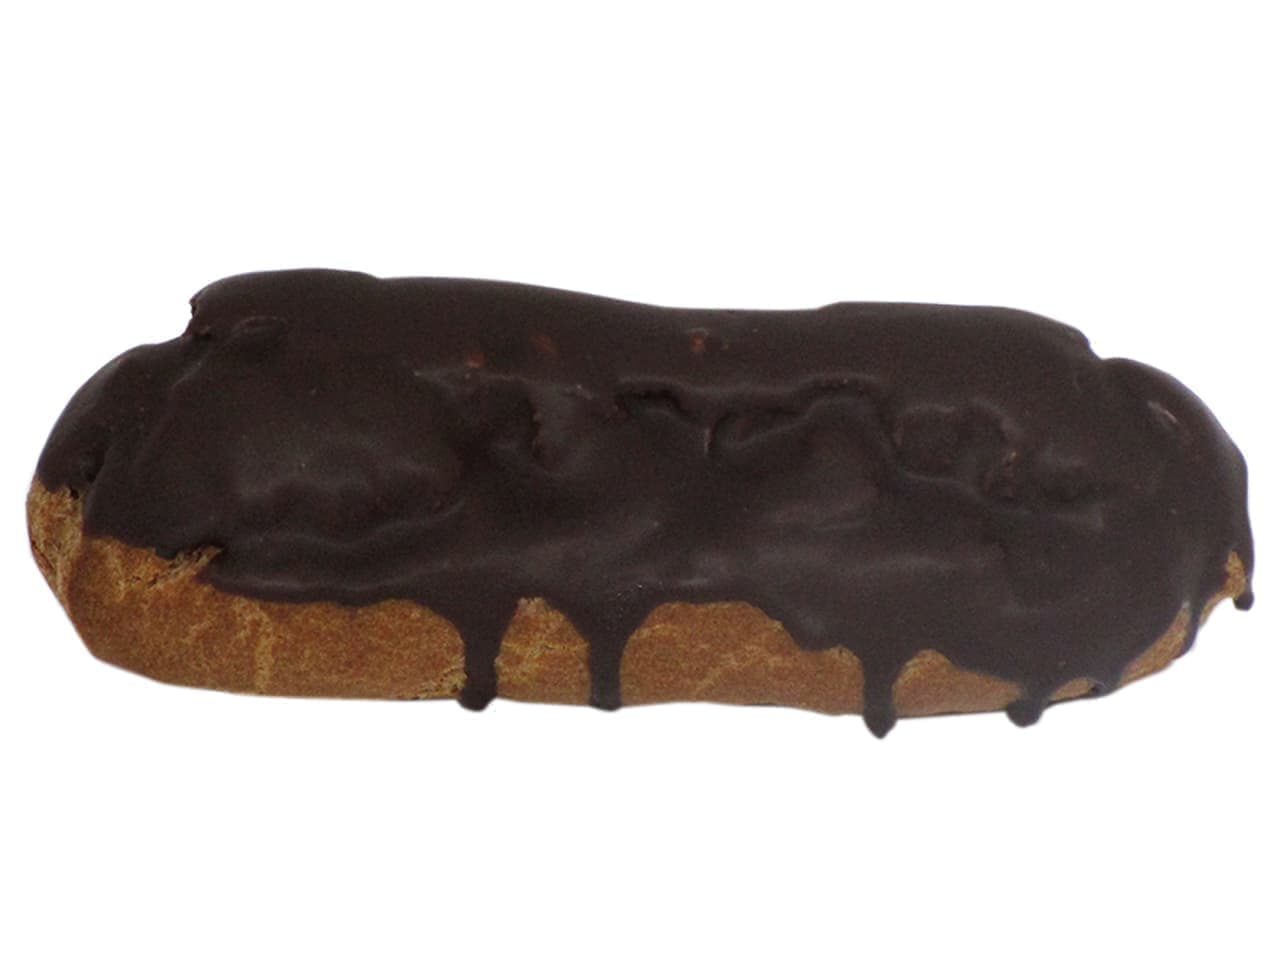 7-ELEVEN "Cacao-scented Chocolat Eclair